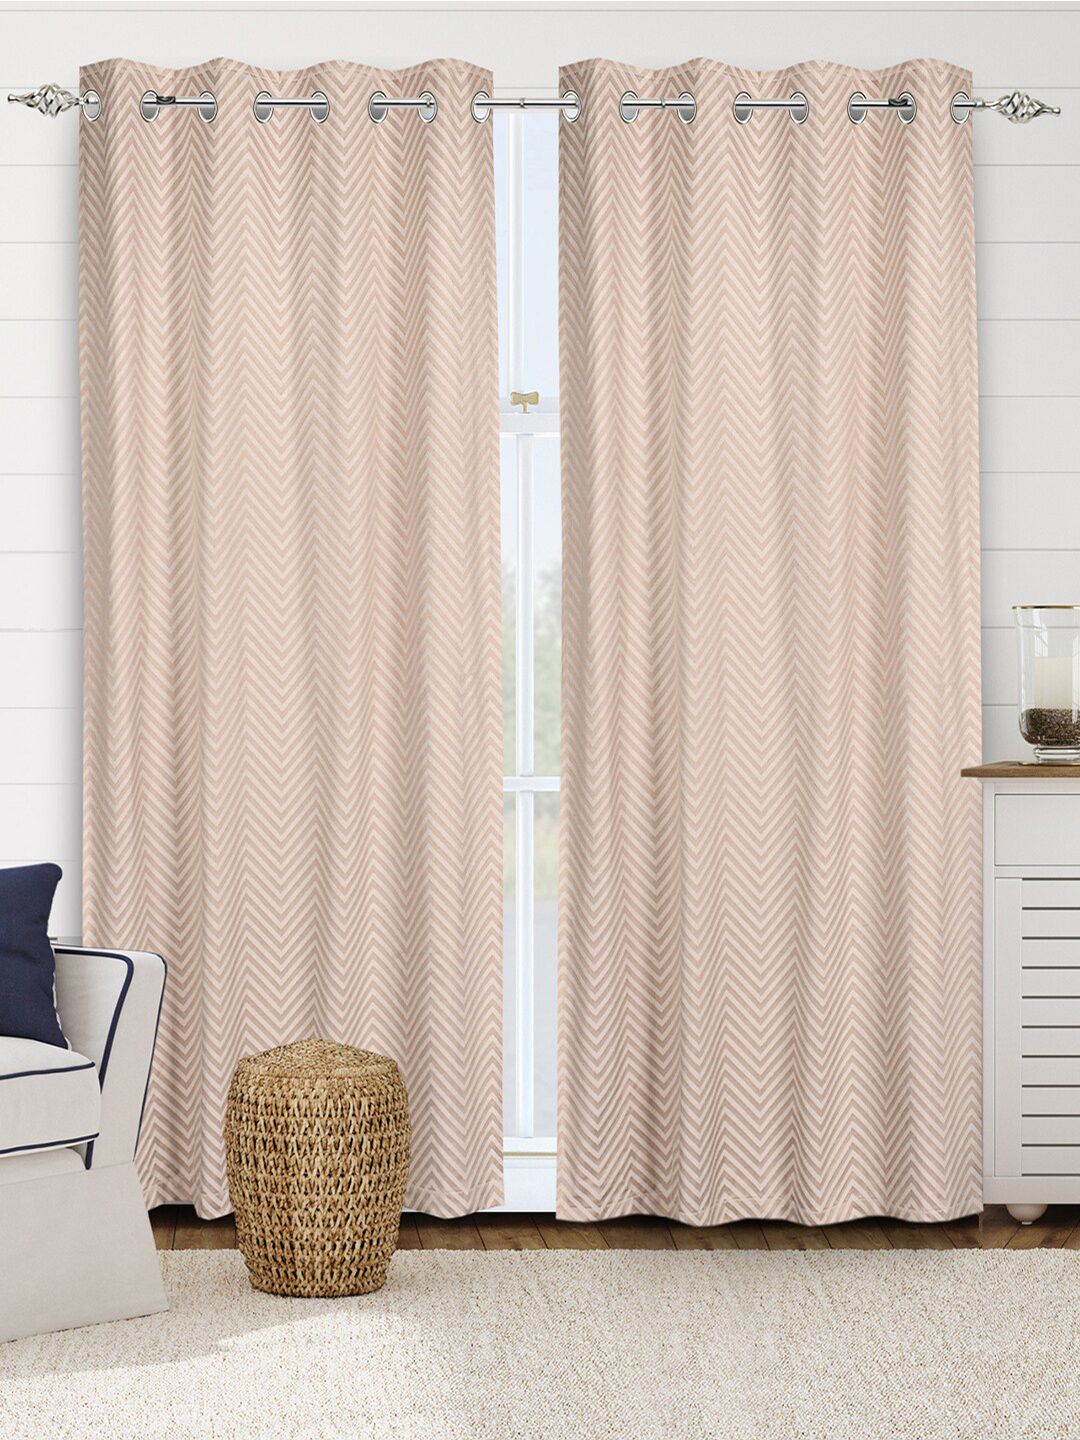 Saral Home Beige Set of 2 Geometric Black Out Door Curtains Price in India